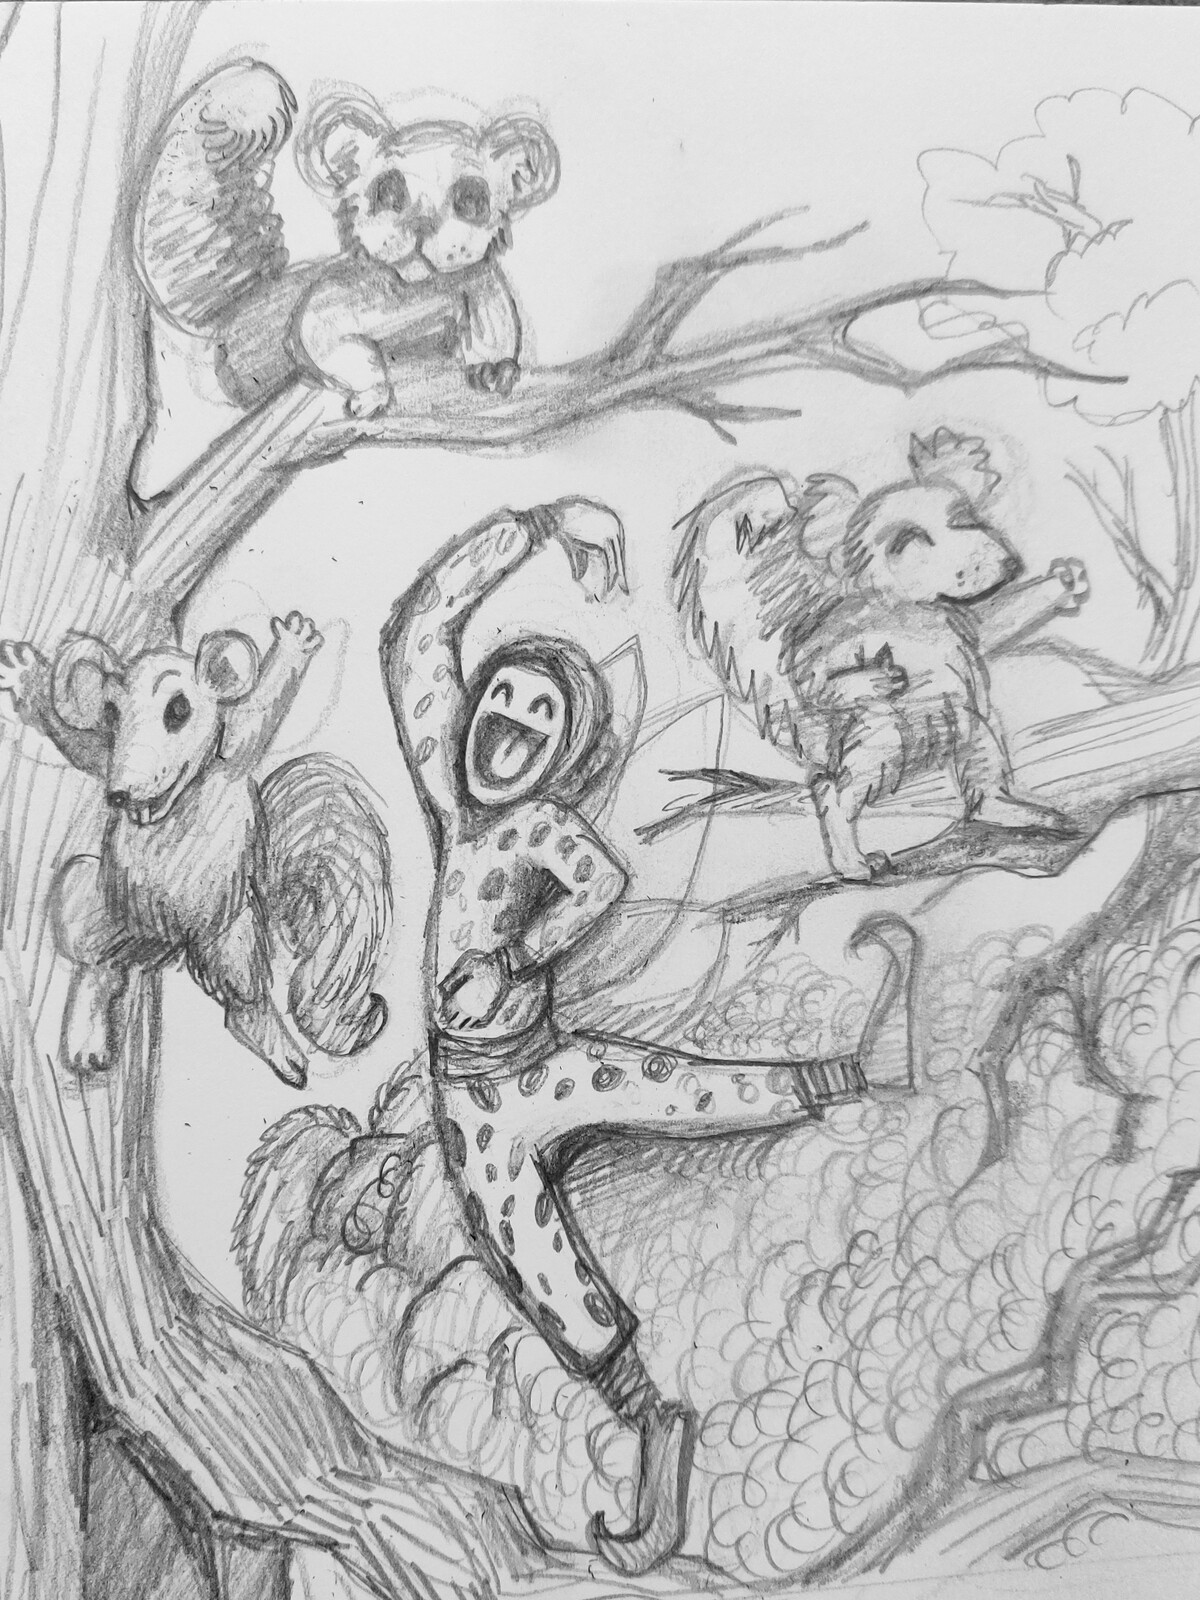 After the amazing acorn harvest, the squirrels celebrate with an epic dance party! Magical Fairy Polka-Dot Onesie Guy cannot help but join in!